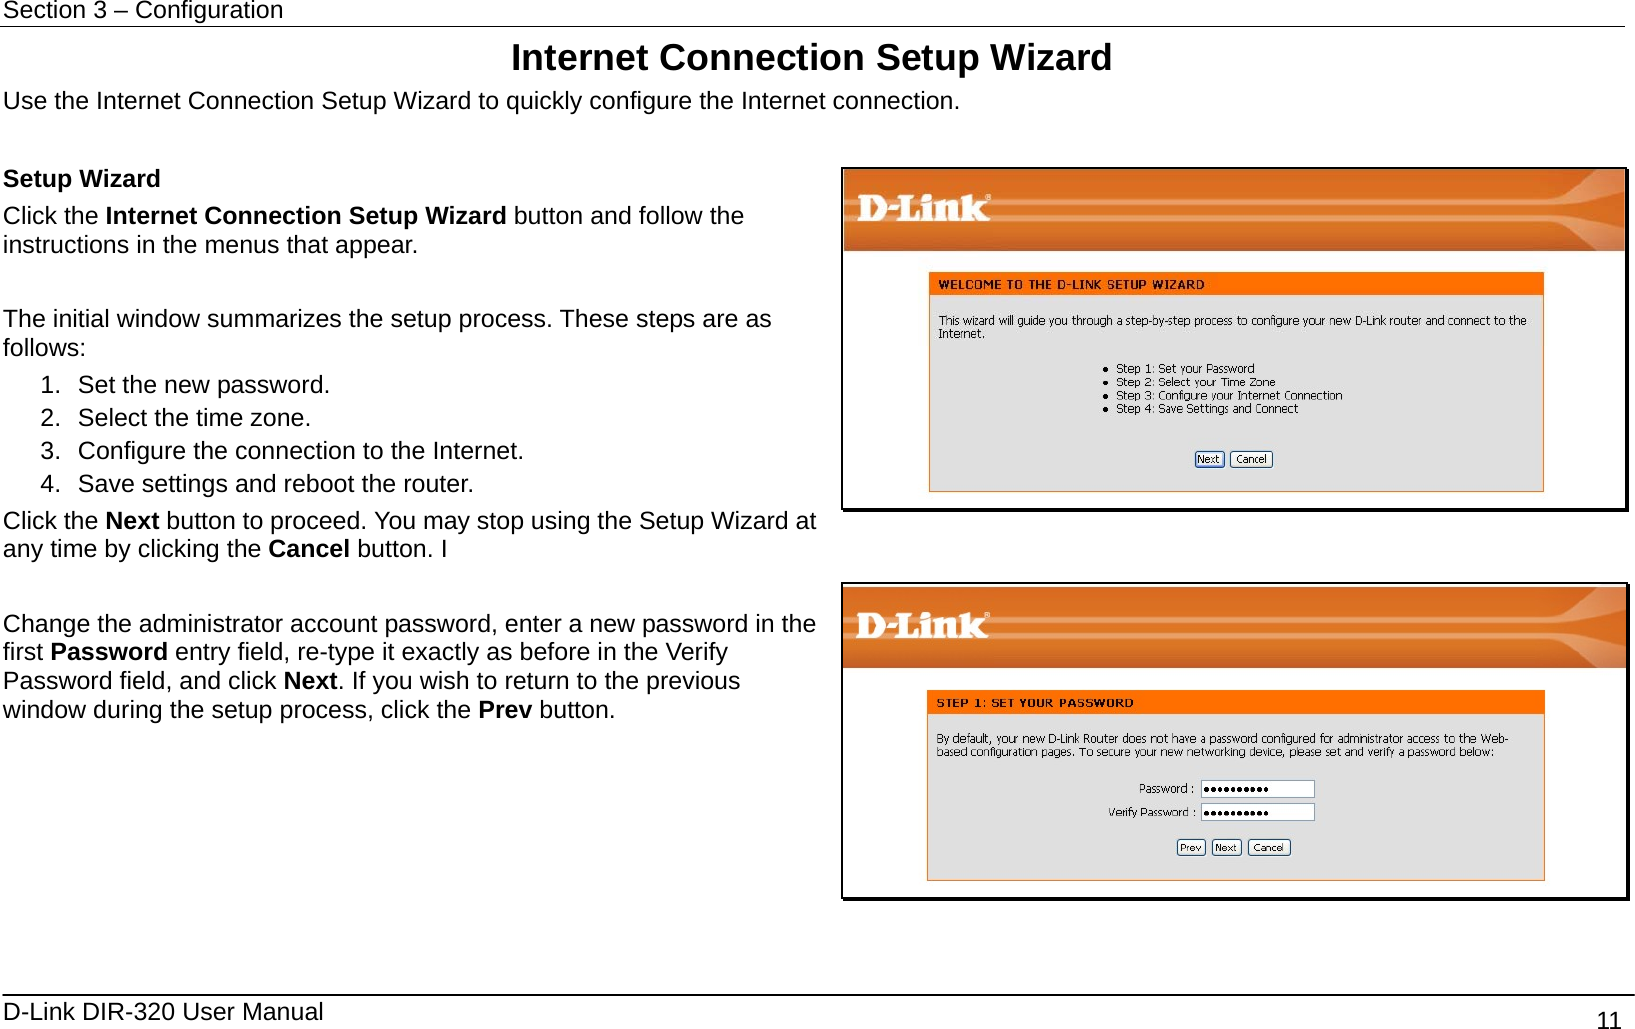 Section 3 – Configuration   D-Link DIR-320 User Manual                                       11 Internet Connection Setup Wizard Use the Internet Connection Setup Wizard to quickly configure the Internet connection.    Setup Wizard Click the Internet Connection Setup Wizard button and follow the instructions in the menus that appear.  The initial window summarizes the setup process. These steps are as follows:  1.  Set the new password. 2.  Select the time zone. 3.  Configure the connection to the Internet.   4.  Save settings and reboot the router. Click the Next button to proceed. You may stop using the Setup Wizard at any time by clicking the Cancel button. I    Change the administrator account password, enter a new password in the first Password entry field, re-type it exactly as before in the Verify Password field, and click Next. If you wish to return to the previous window during the setup process, click the Prev button.       